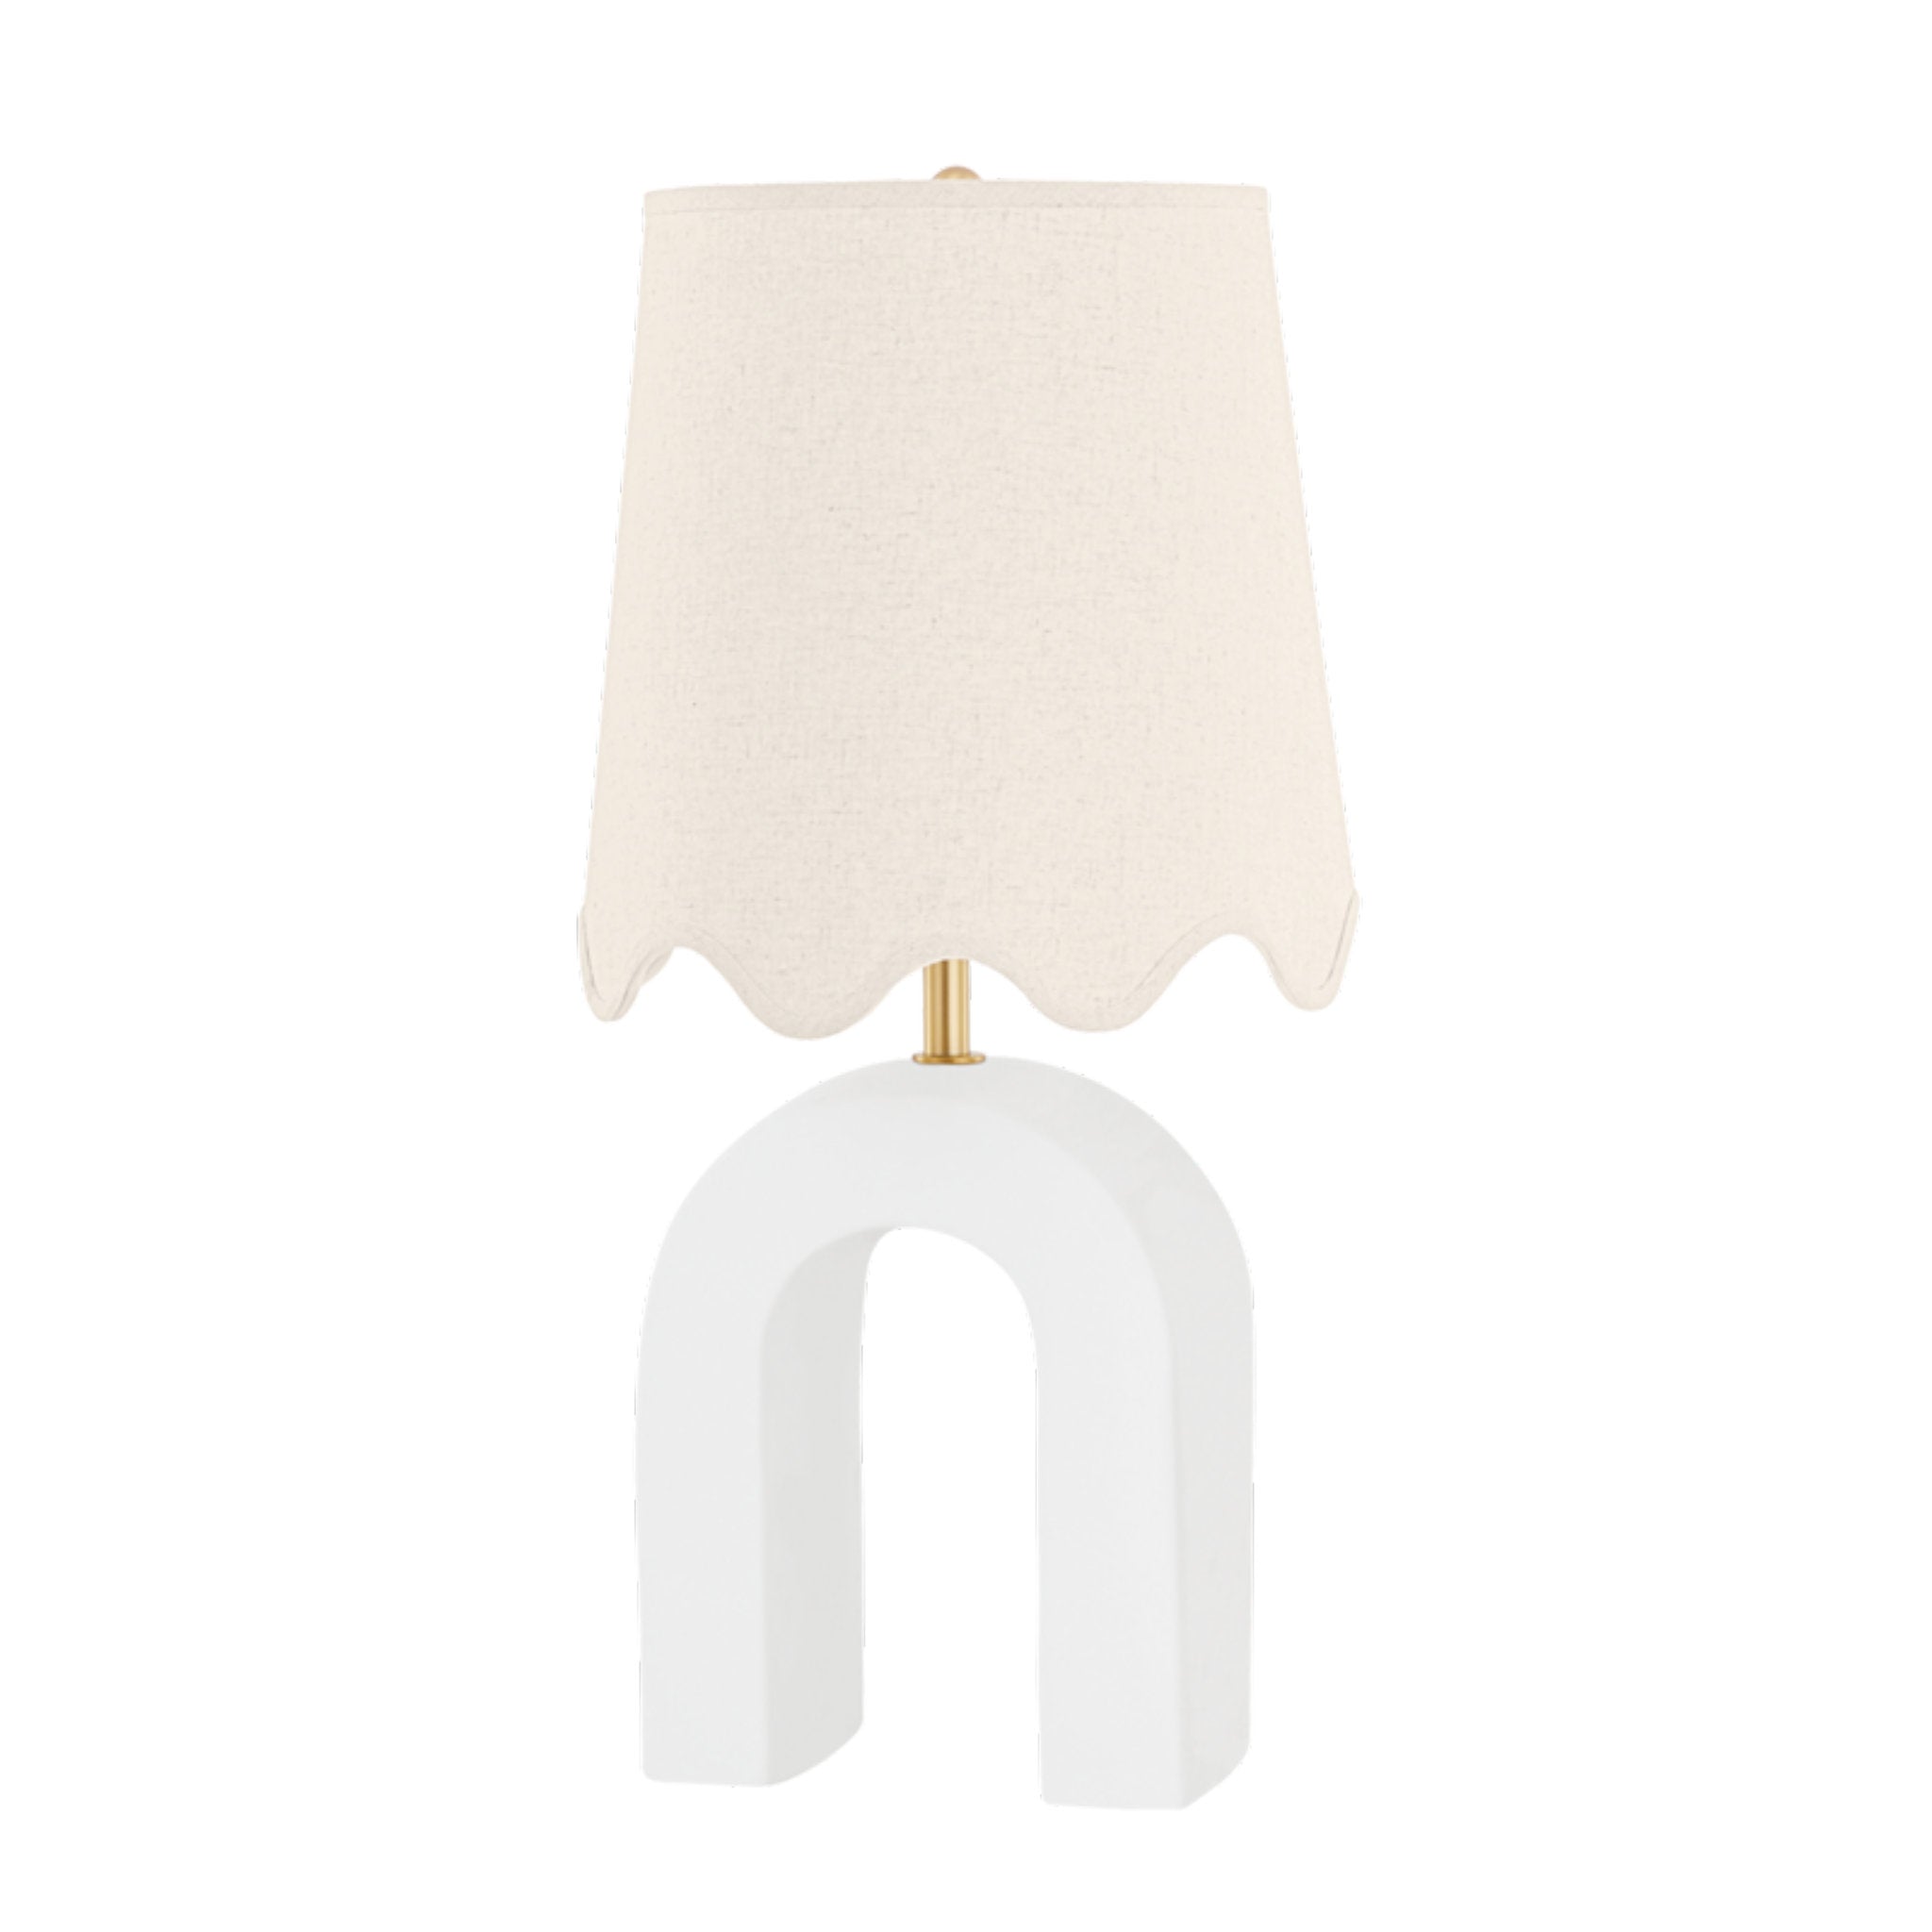 Roshani 1-Light Table Lamp in Aged Brass/Ceramic Raw Matte White by Dabito